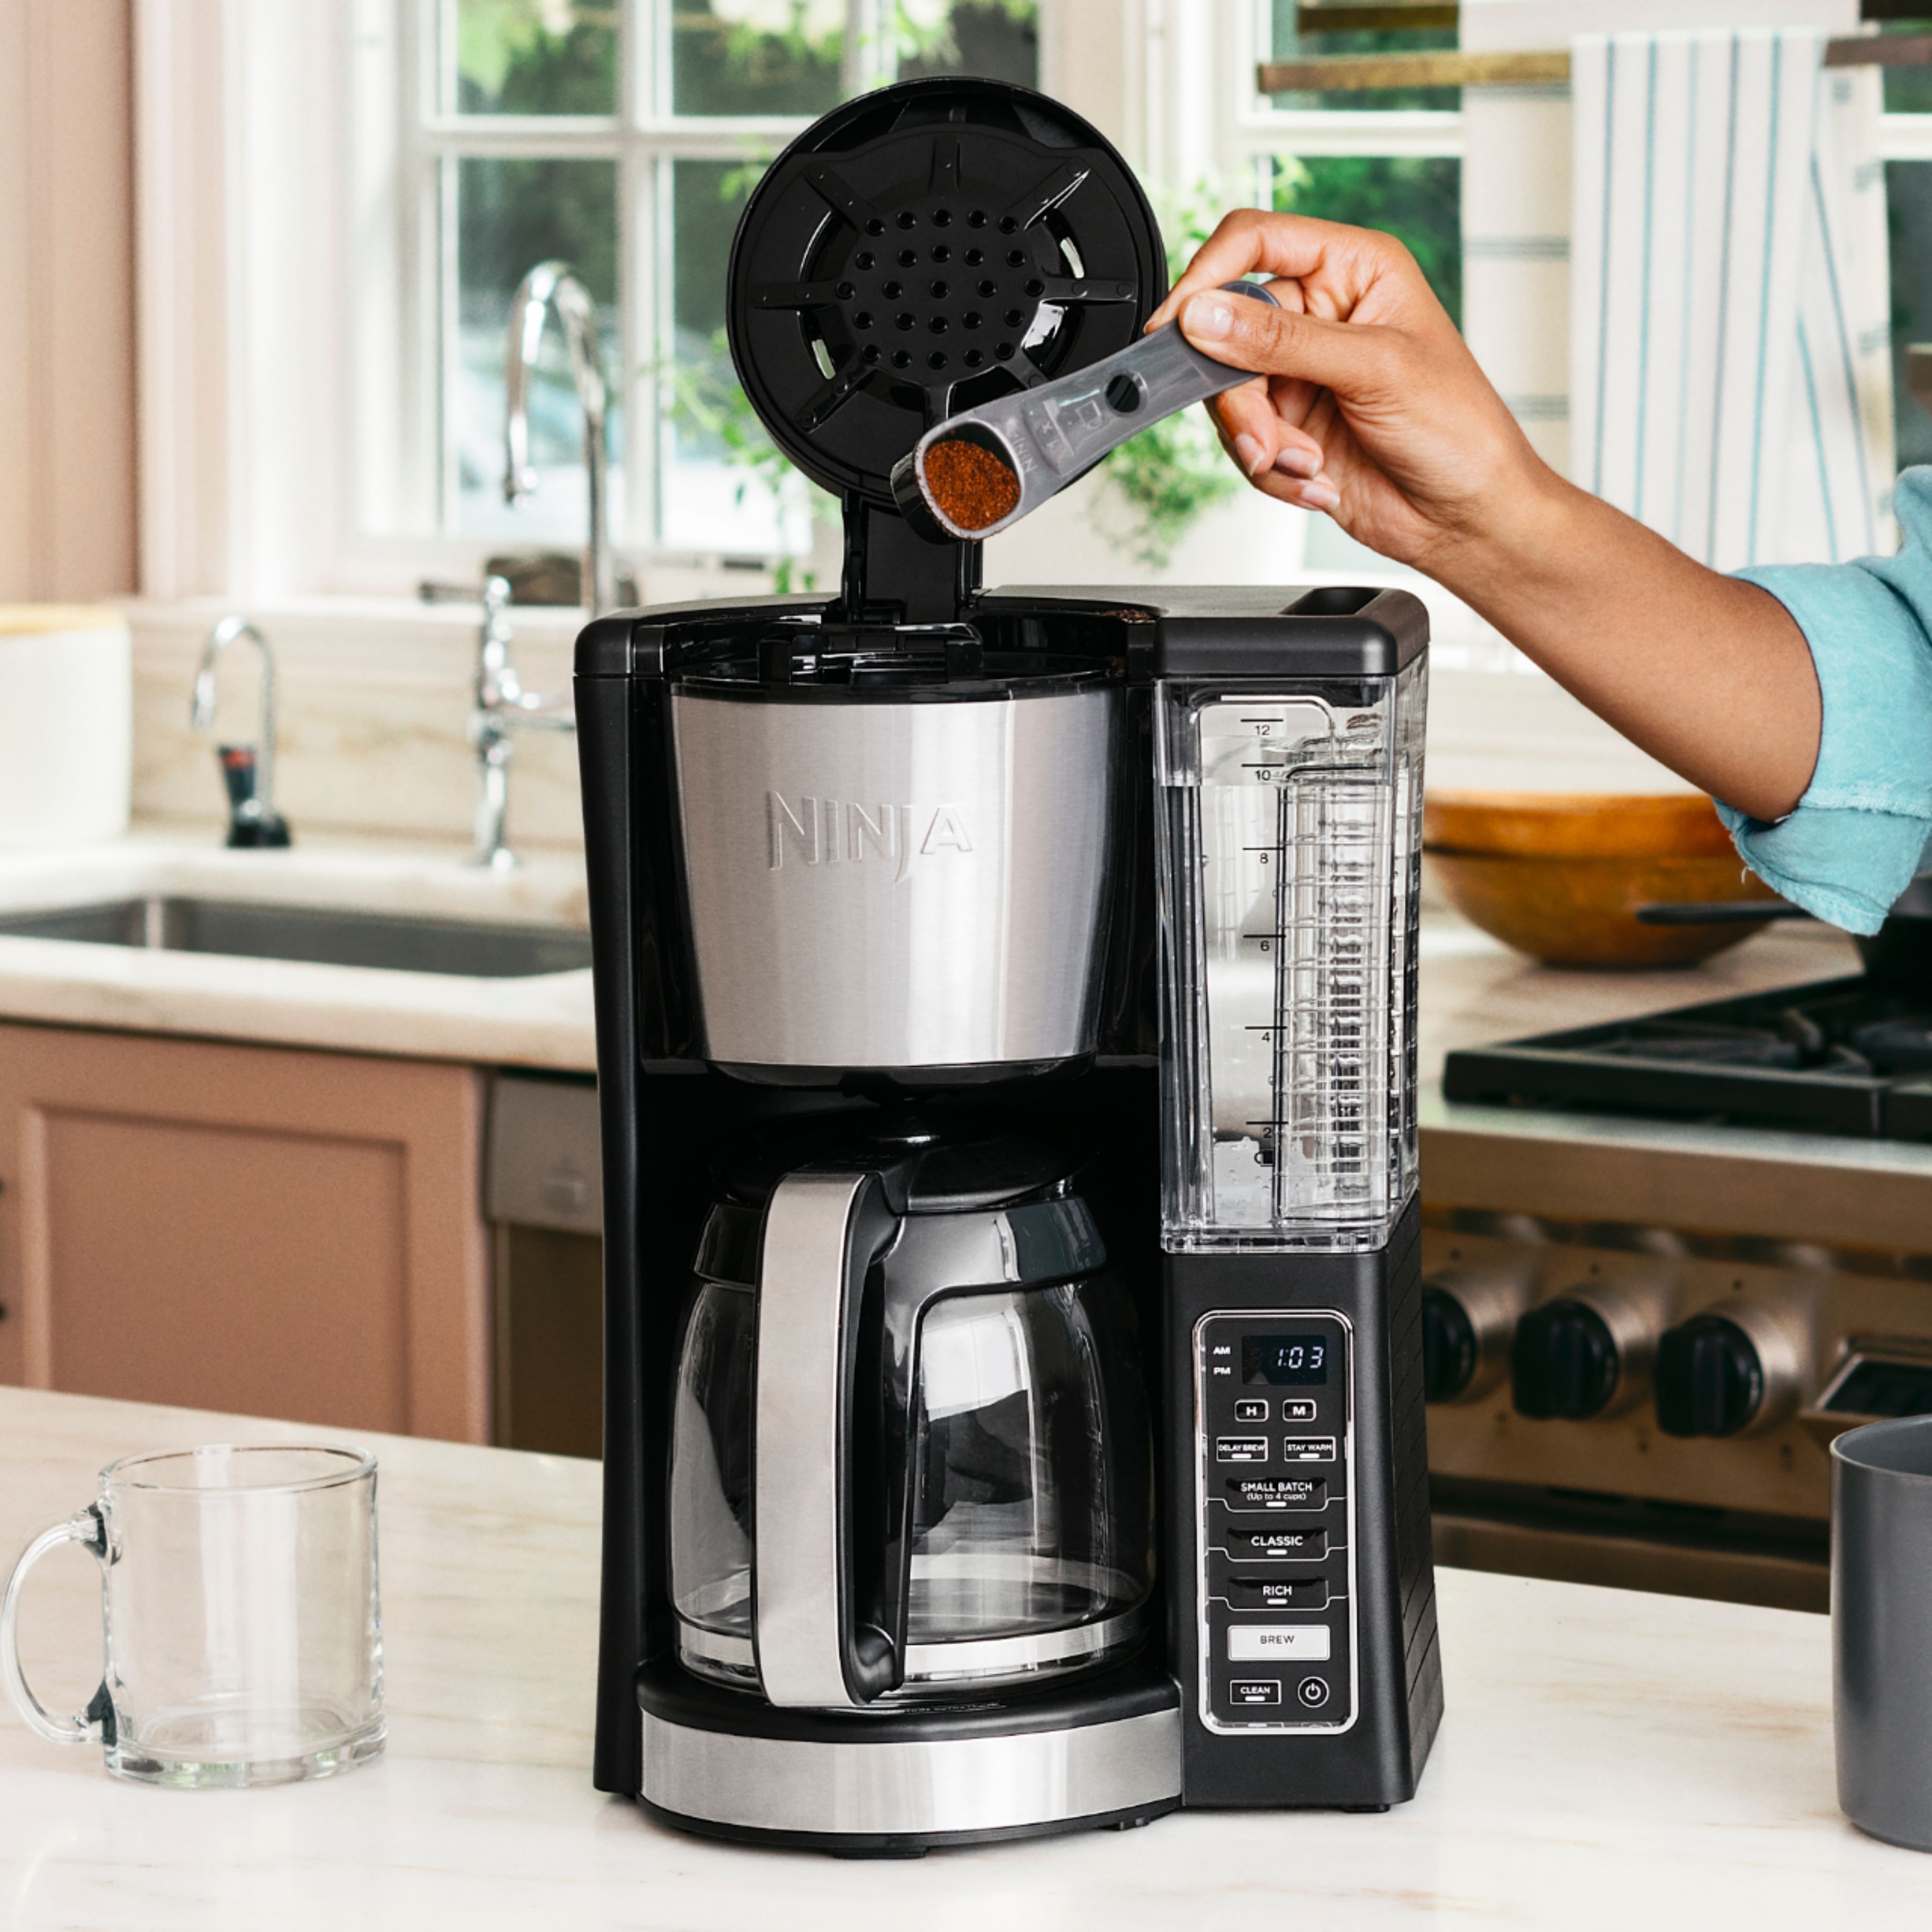 Ninja CE251 12 Cup Coffee Brewer - Perfect cup of coffee every time!   Quick Review 